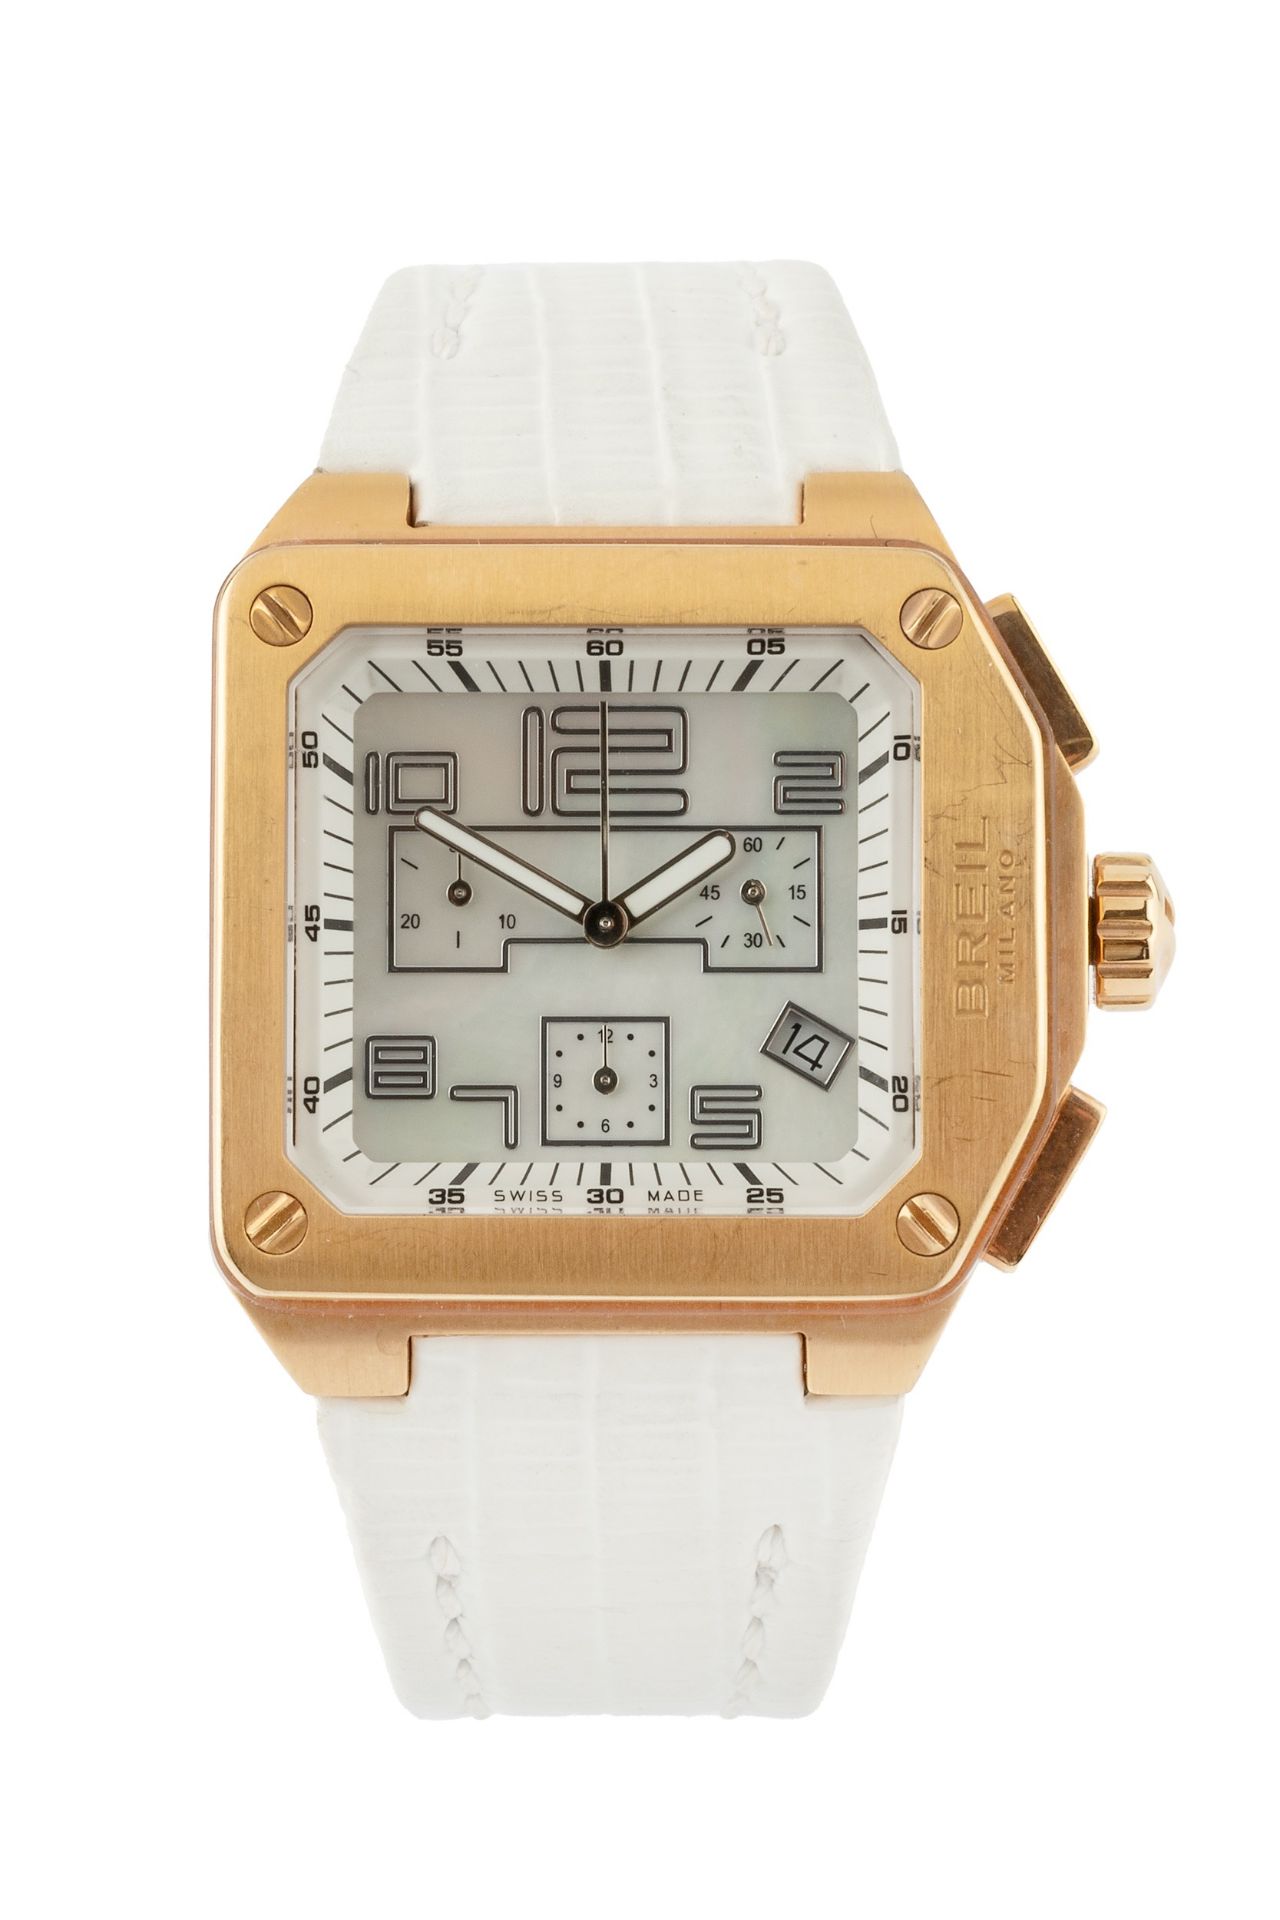 A gilt metal chronograph by Breil, the chamfered square mother o'pearl dial with three subsidiary